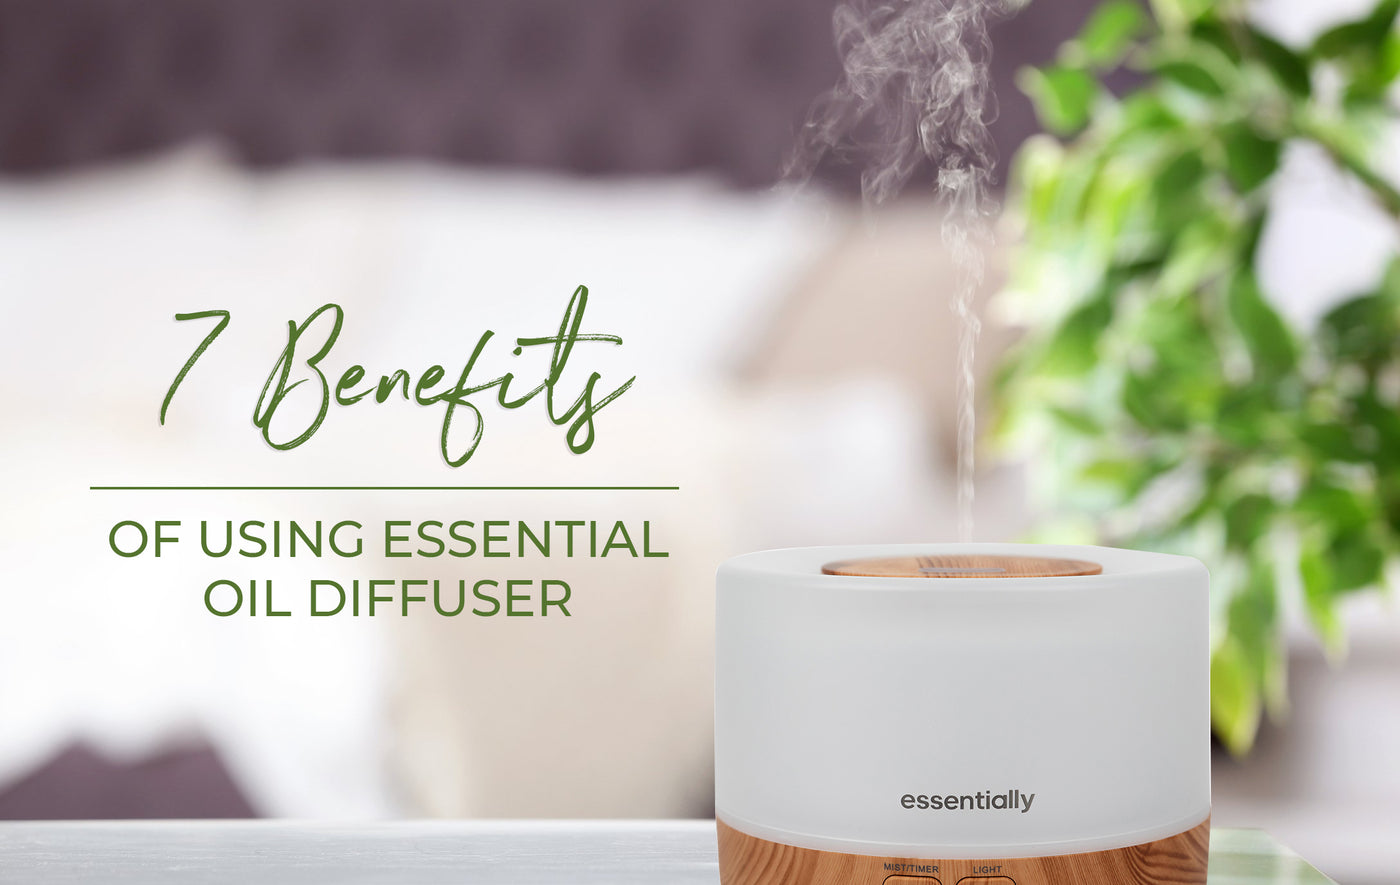 7 Benefits of Using an Essential Oil Diffuser